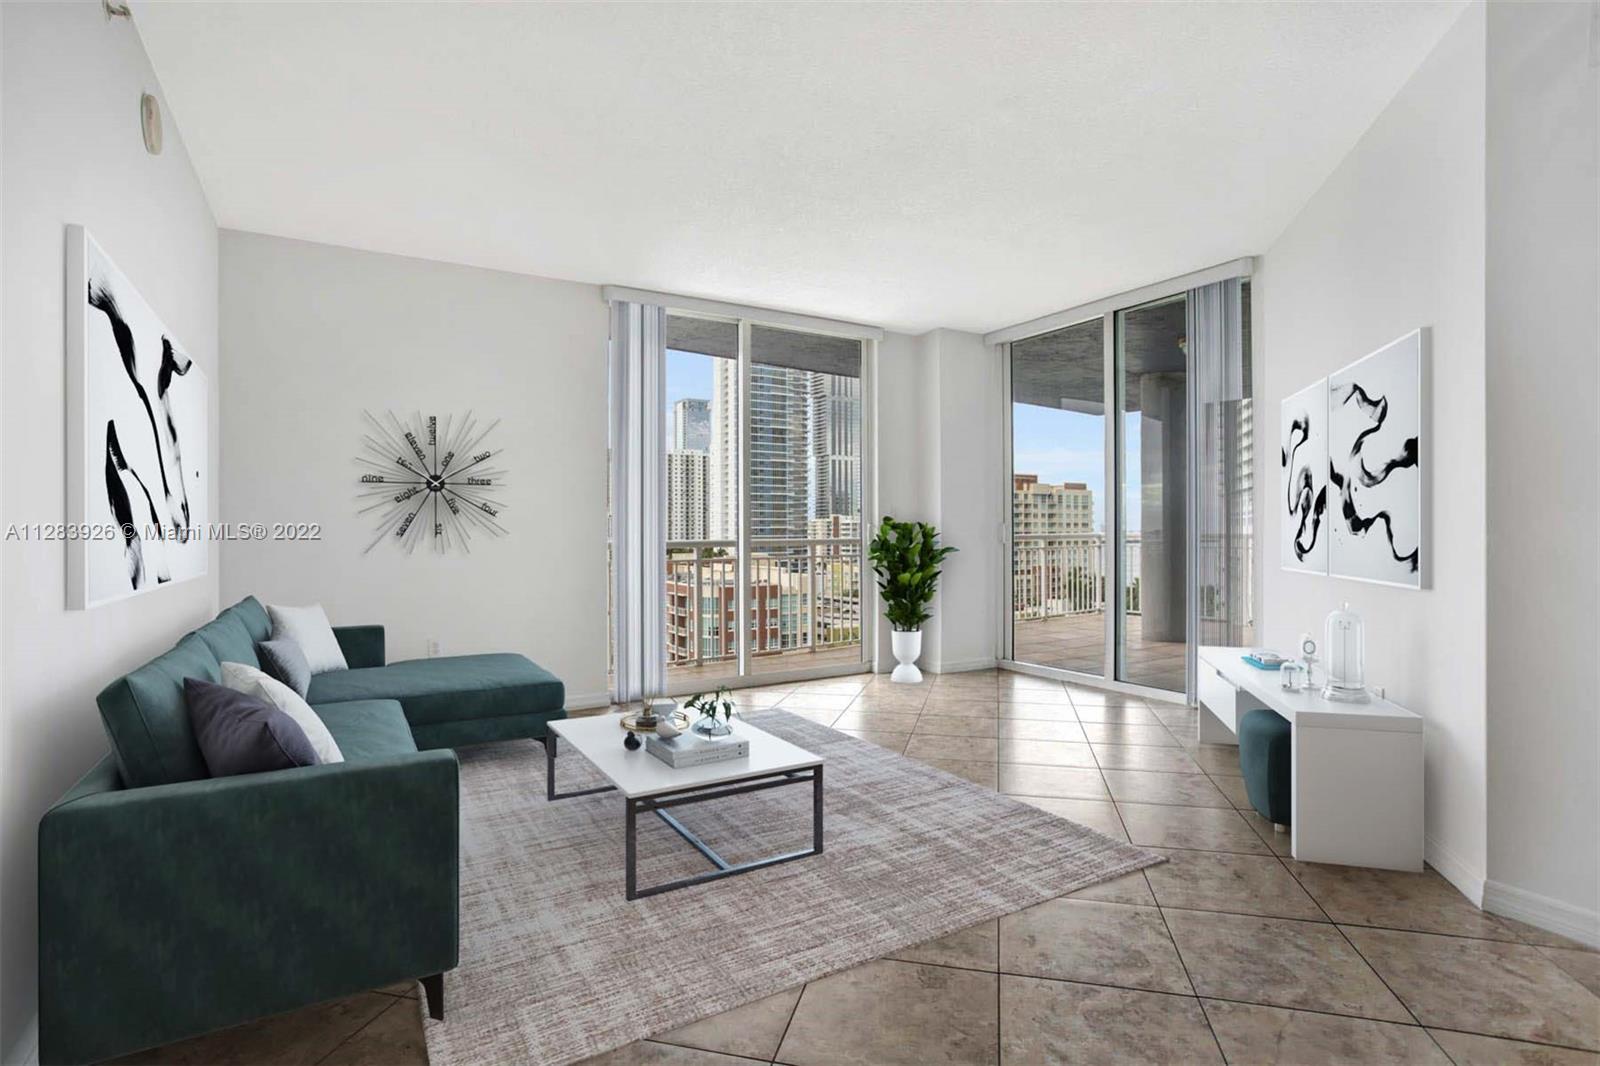 Large three-bedroom corner unit with a lot of natural light. It features a wraparound balcony with dramatic city and bay views both stunning during the day & night. The large balcony is perfect for indoor outdoor living to enjoy meals, views & a breeze! Great location near Downtown, Brickell, Wynwood, Design District and 10 min from the airport & beach. Walking distance to Publix, park, many restaurants and coffee shops. Building has 24-hour security, concierge, gym, pool, jacuzzi, and more! Two assigned tandem parking spaces. Washer and dryer in unit!